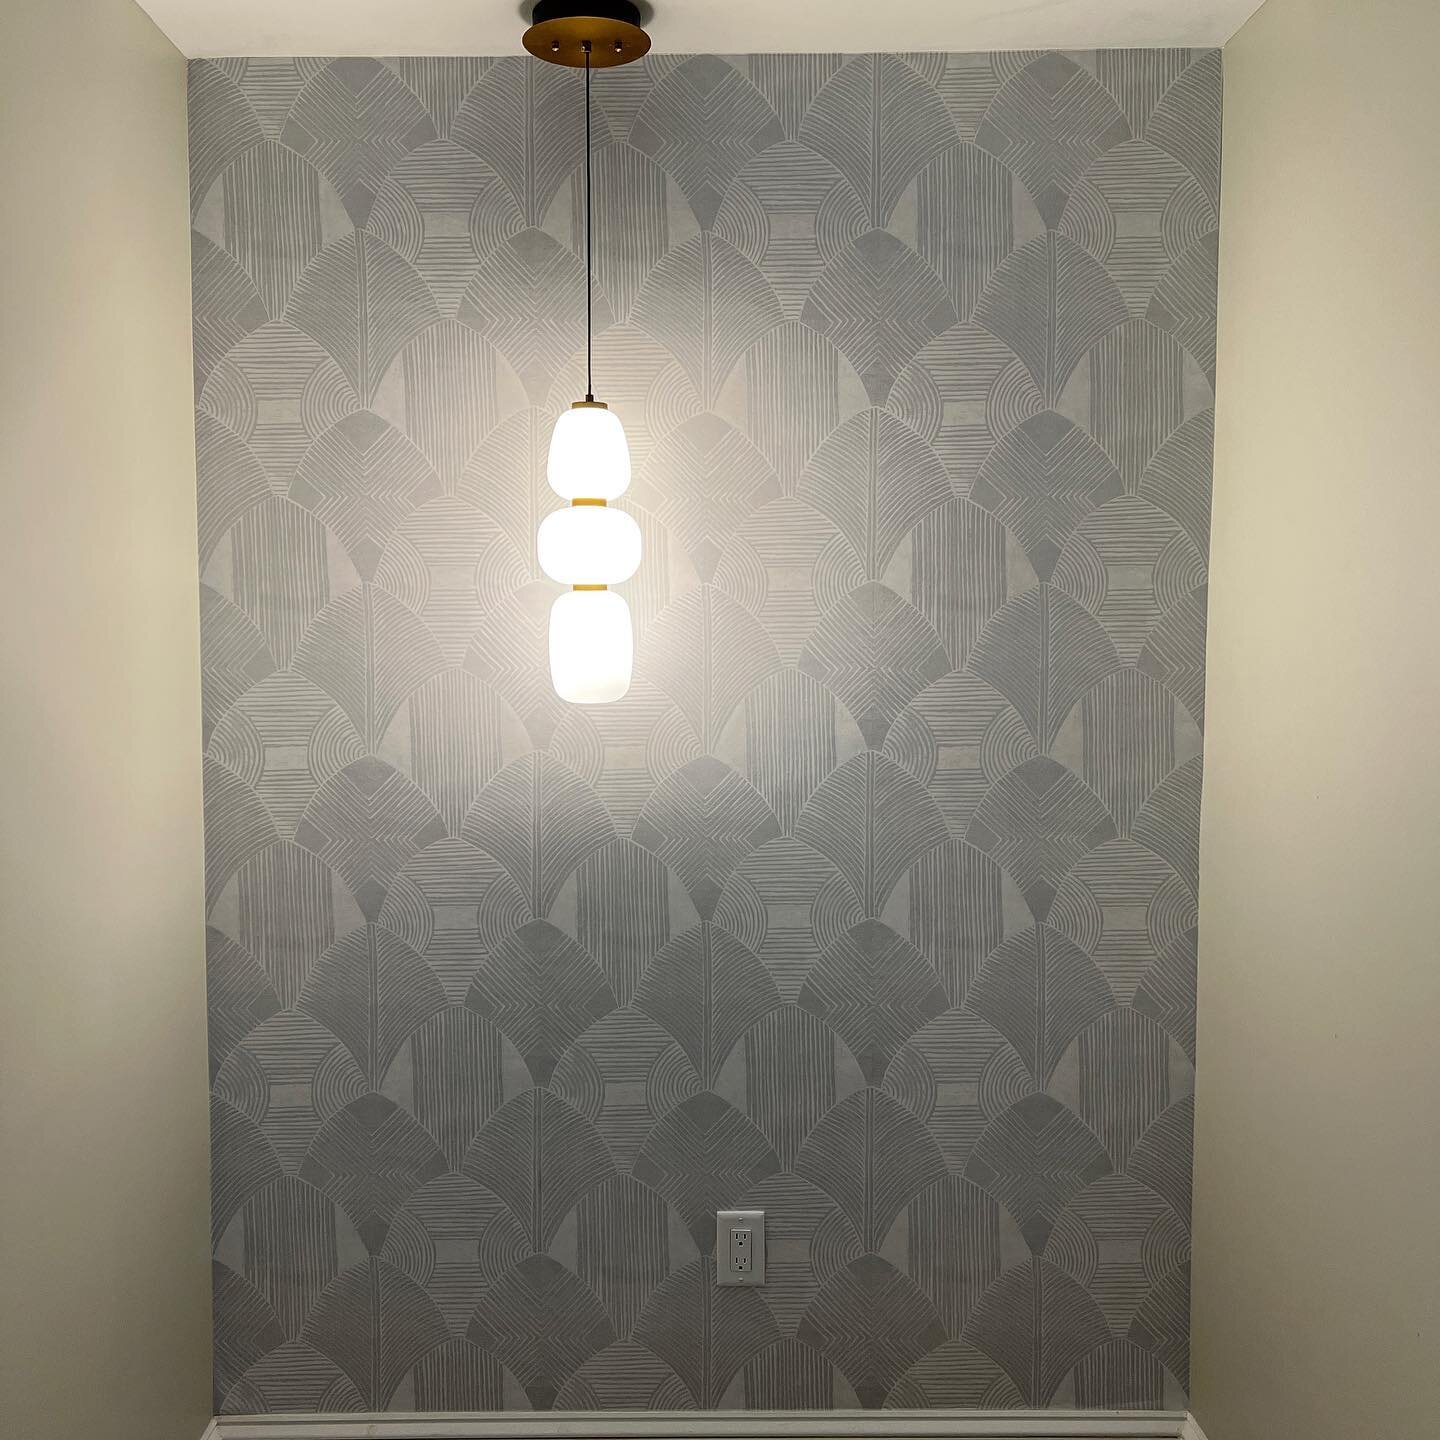 Got to love a good wallpaper installation.
.
Coming Soon in Kalorama.
📍2446 Massachusetts Ave NW
.